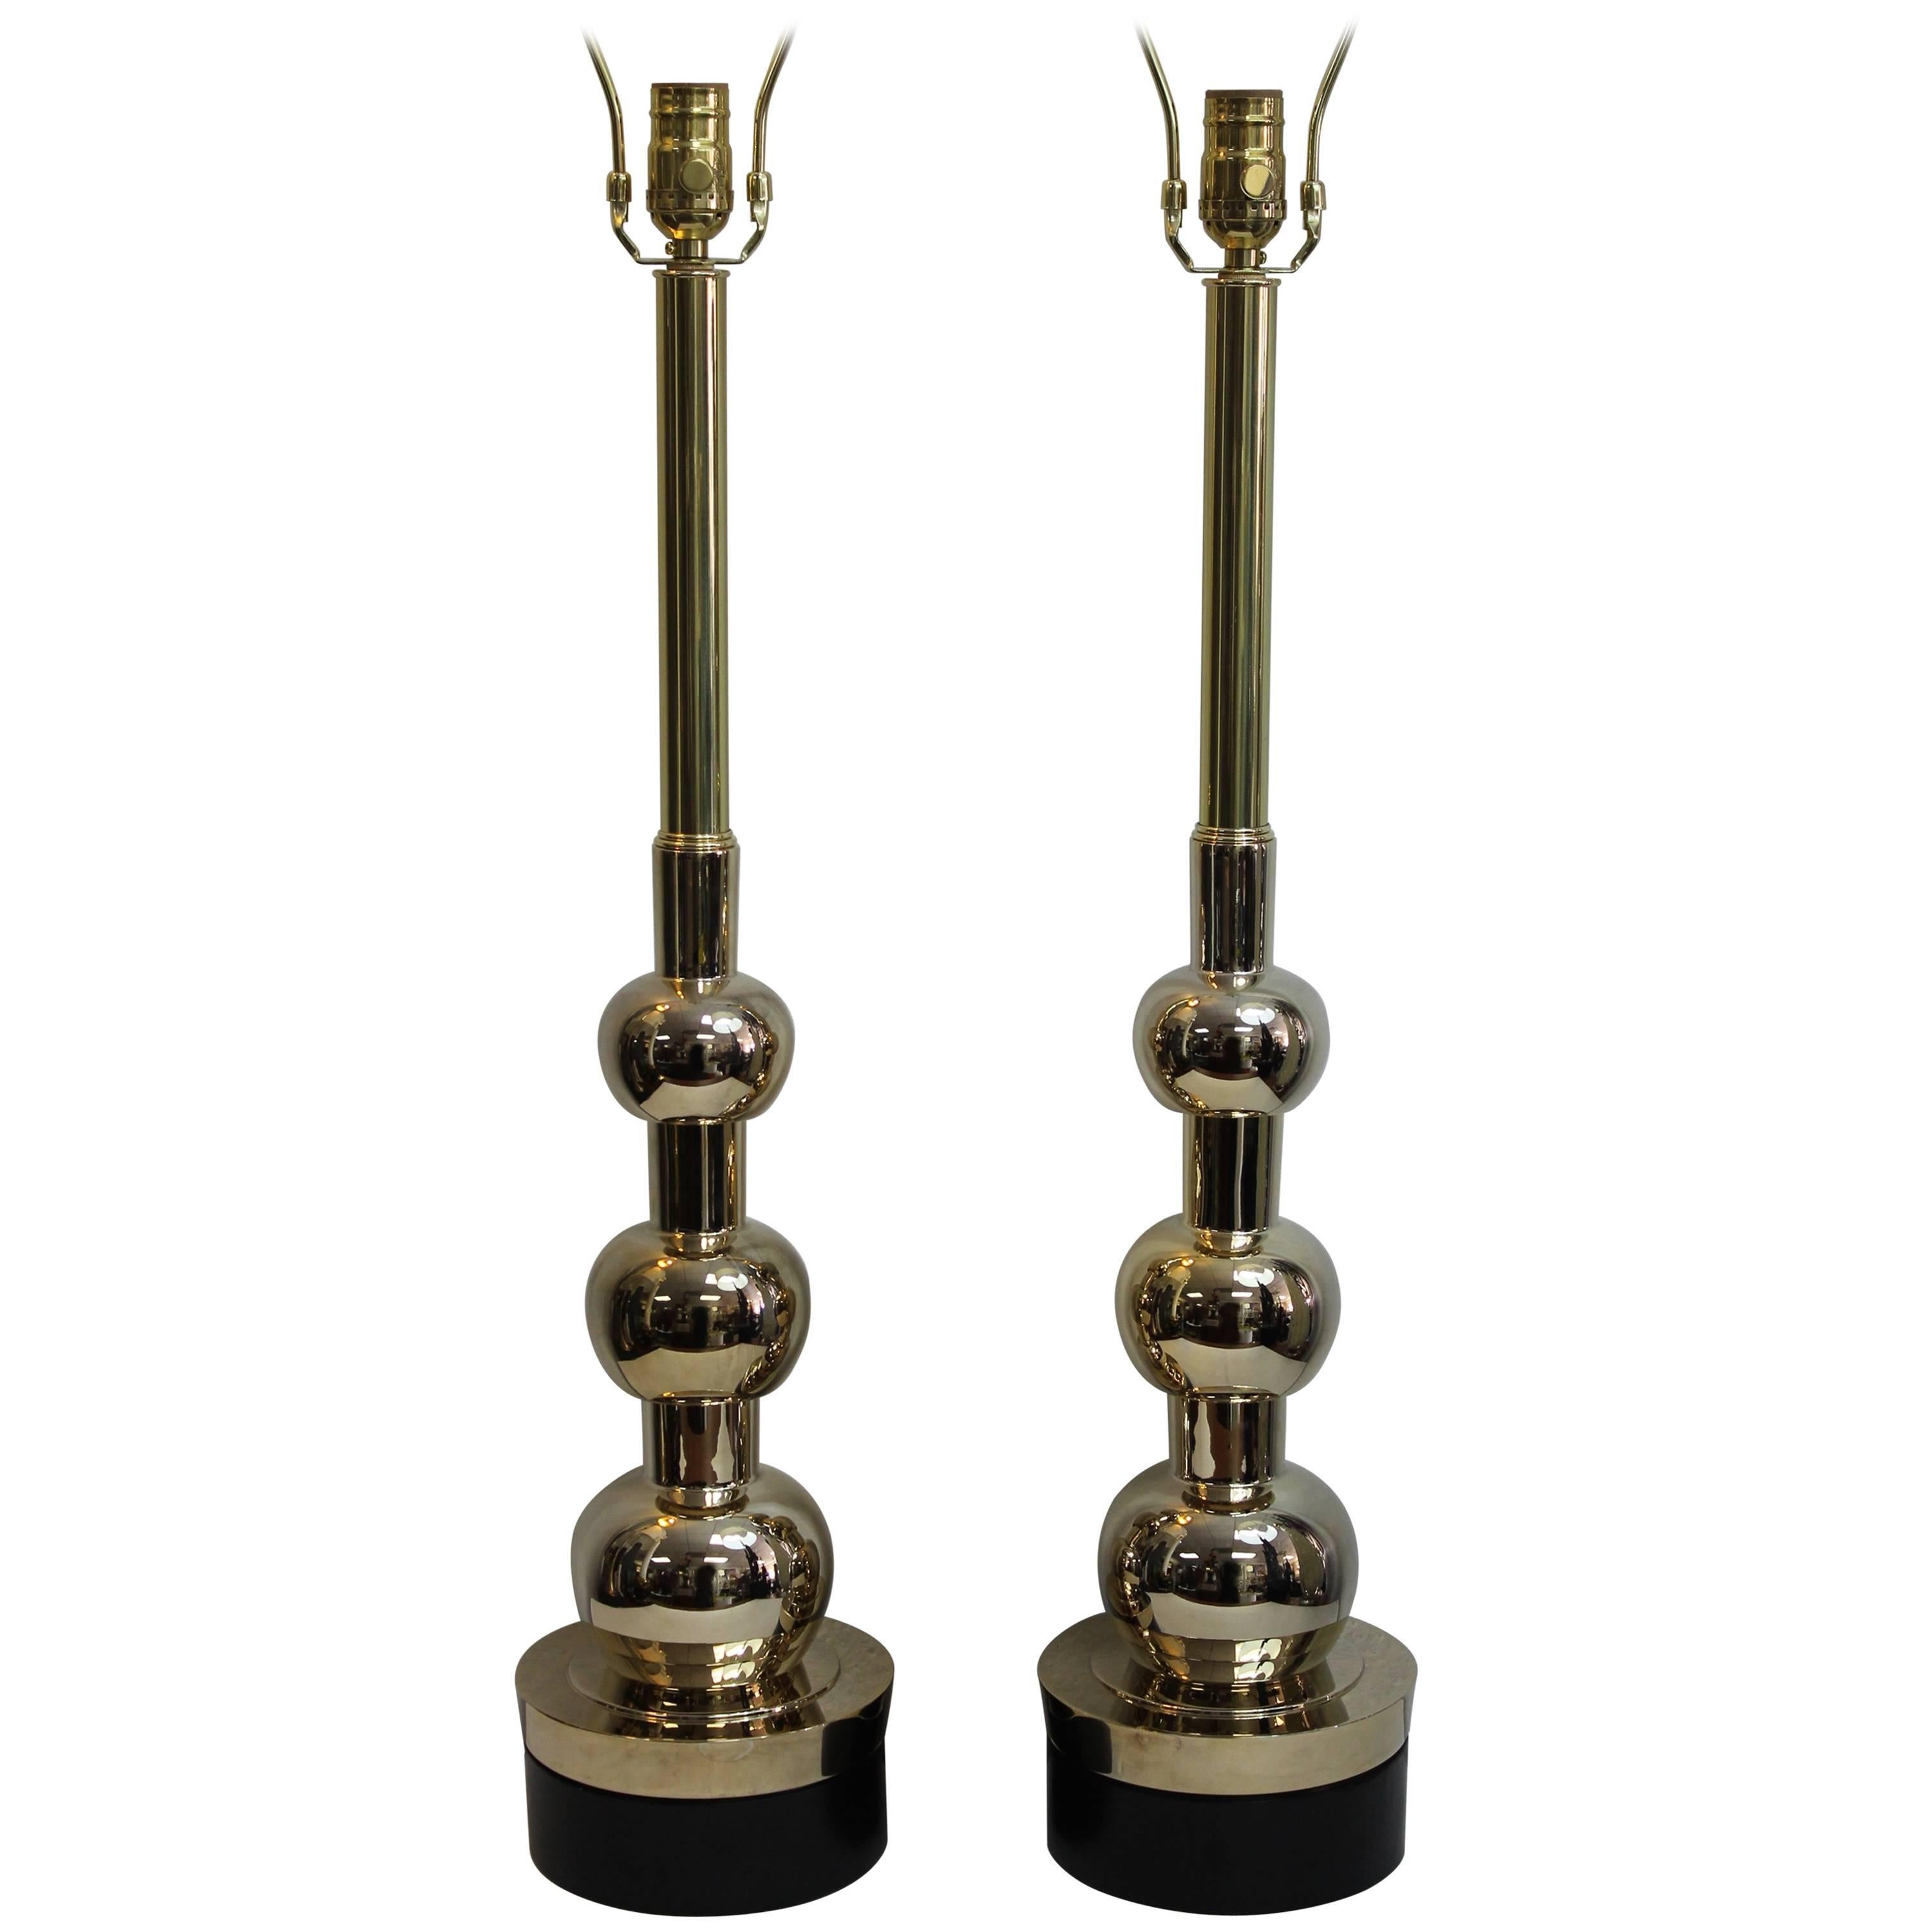 Pair of Bronze/Brass Lamps by Stiffel Lamp Co